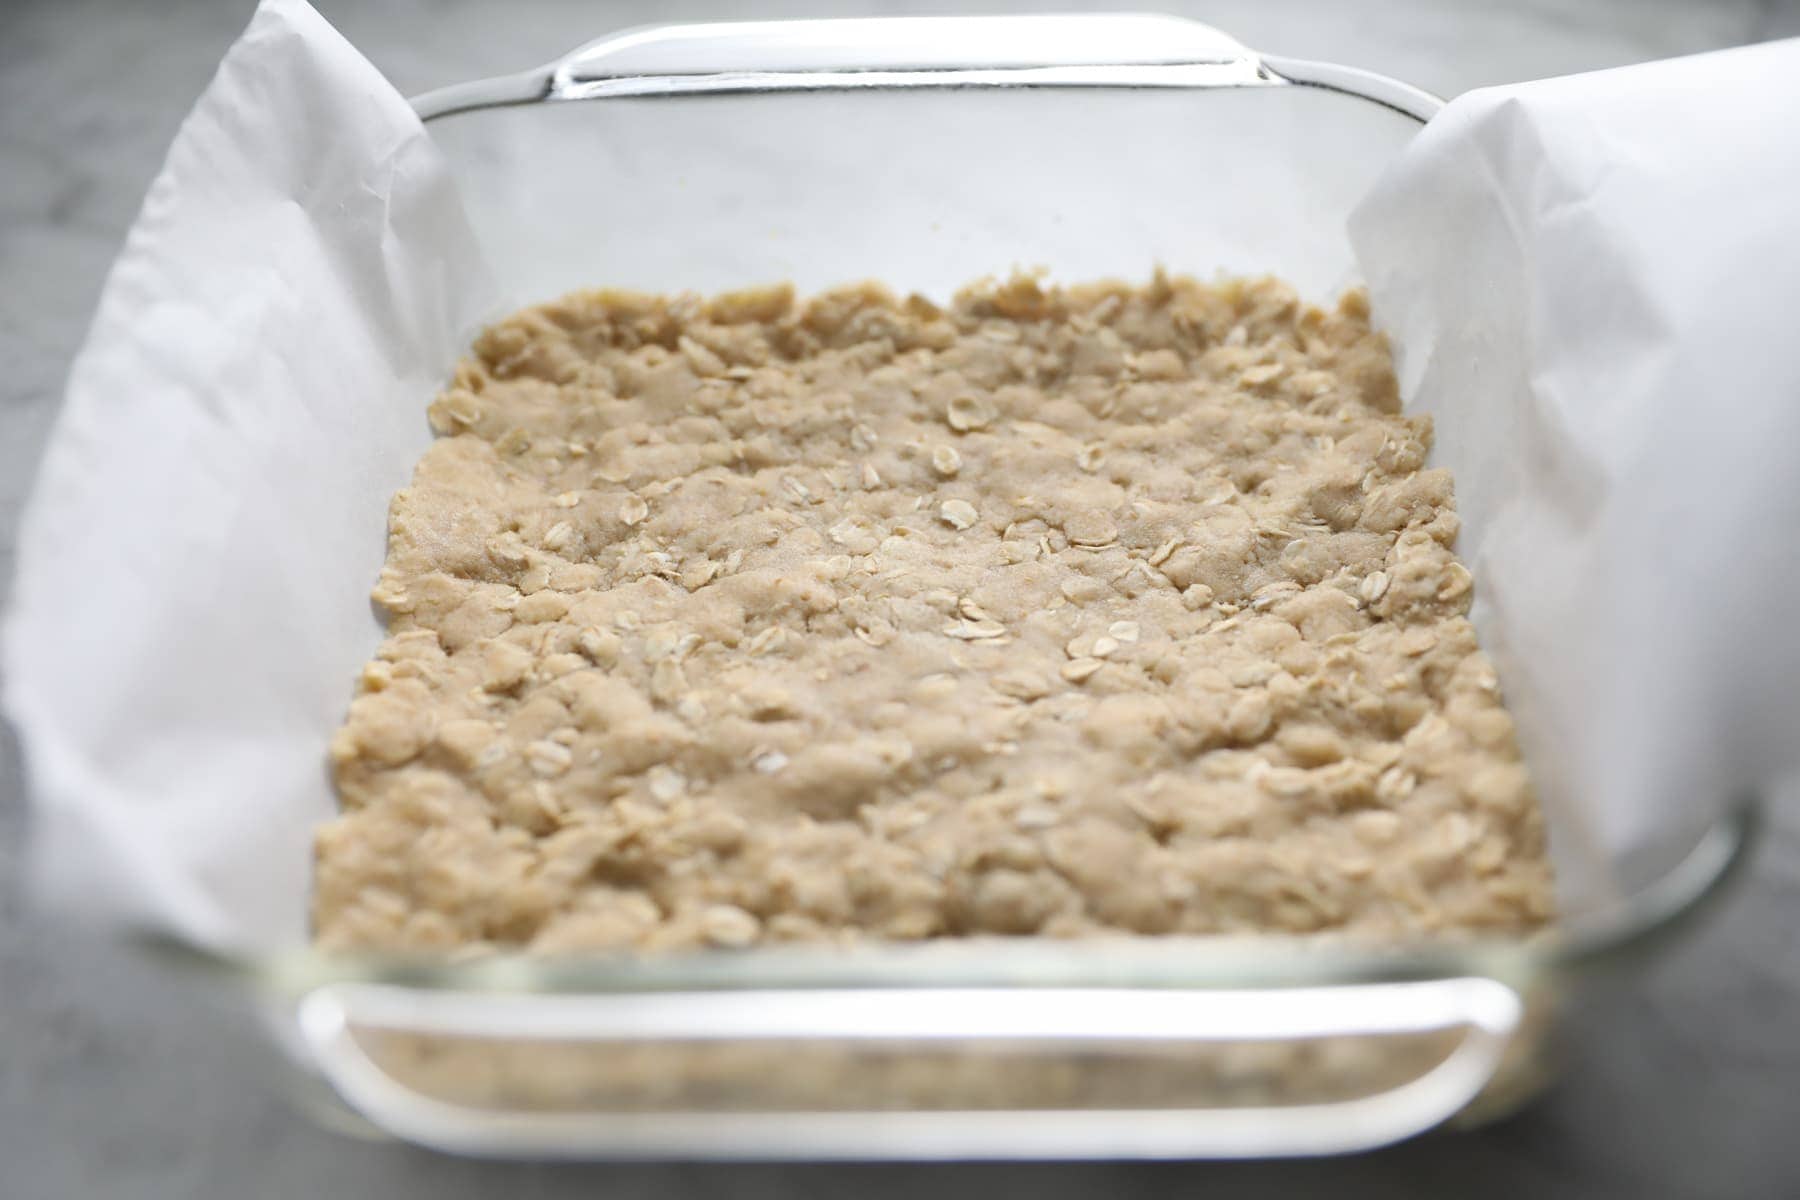 Oatmeal Cookie Dough pushed into a parchment paper lined square baking dish